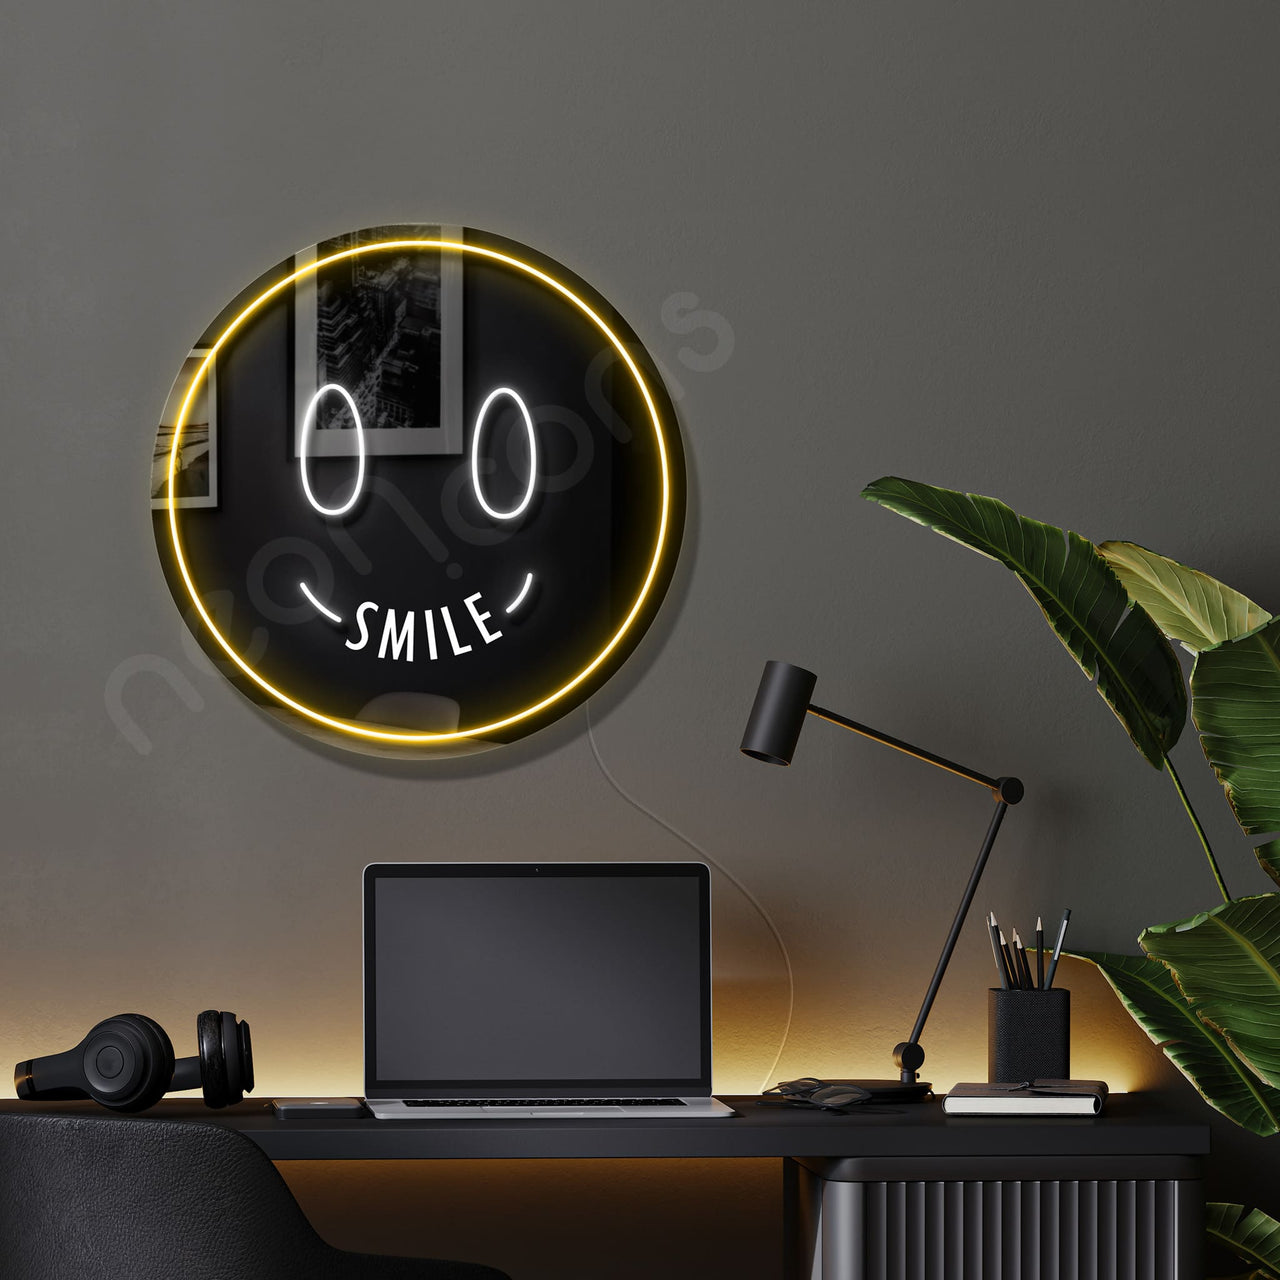 "Smile" LED Neon x Acrylic Mirror by Neon Icons